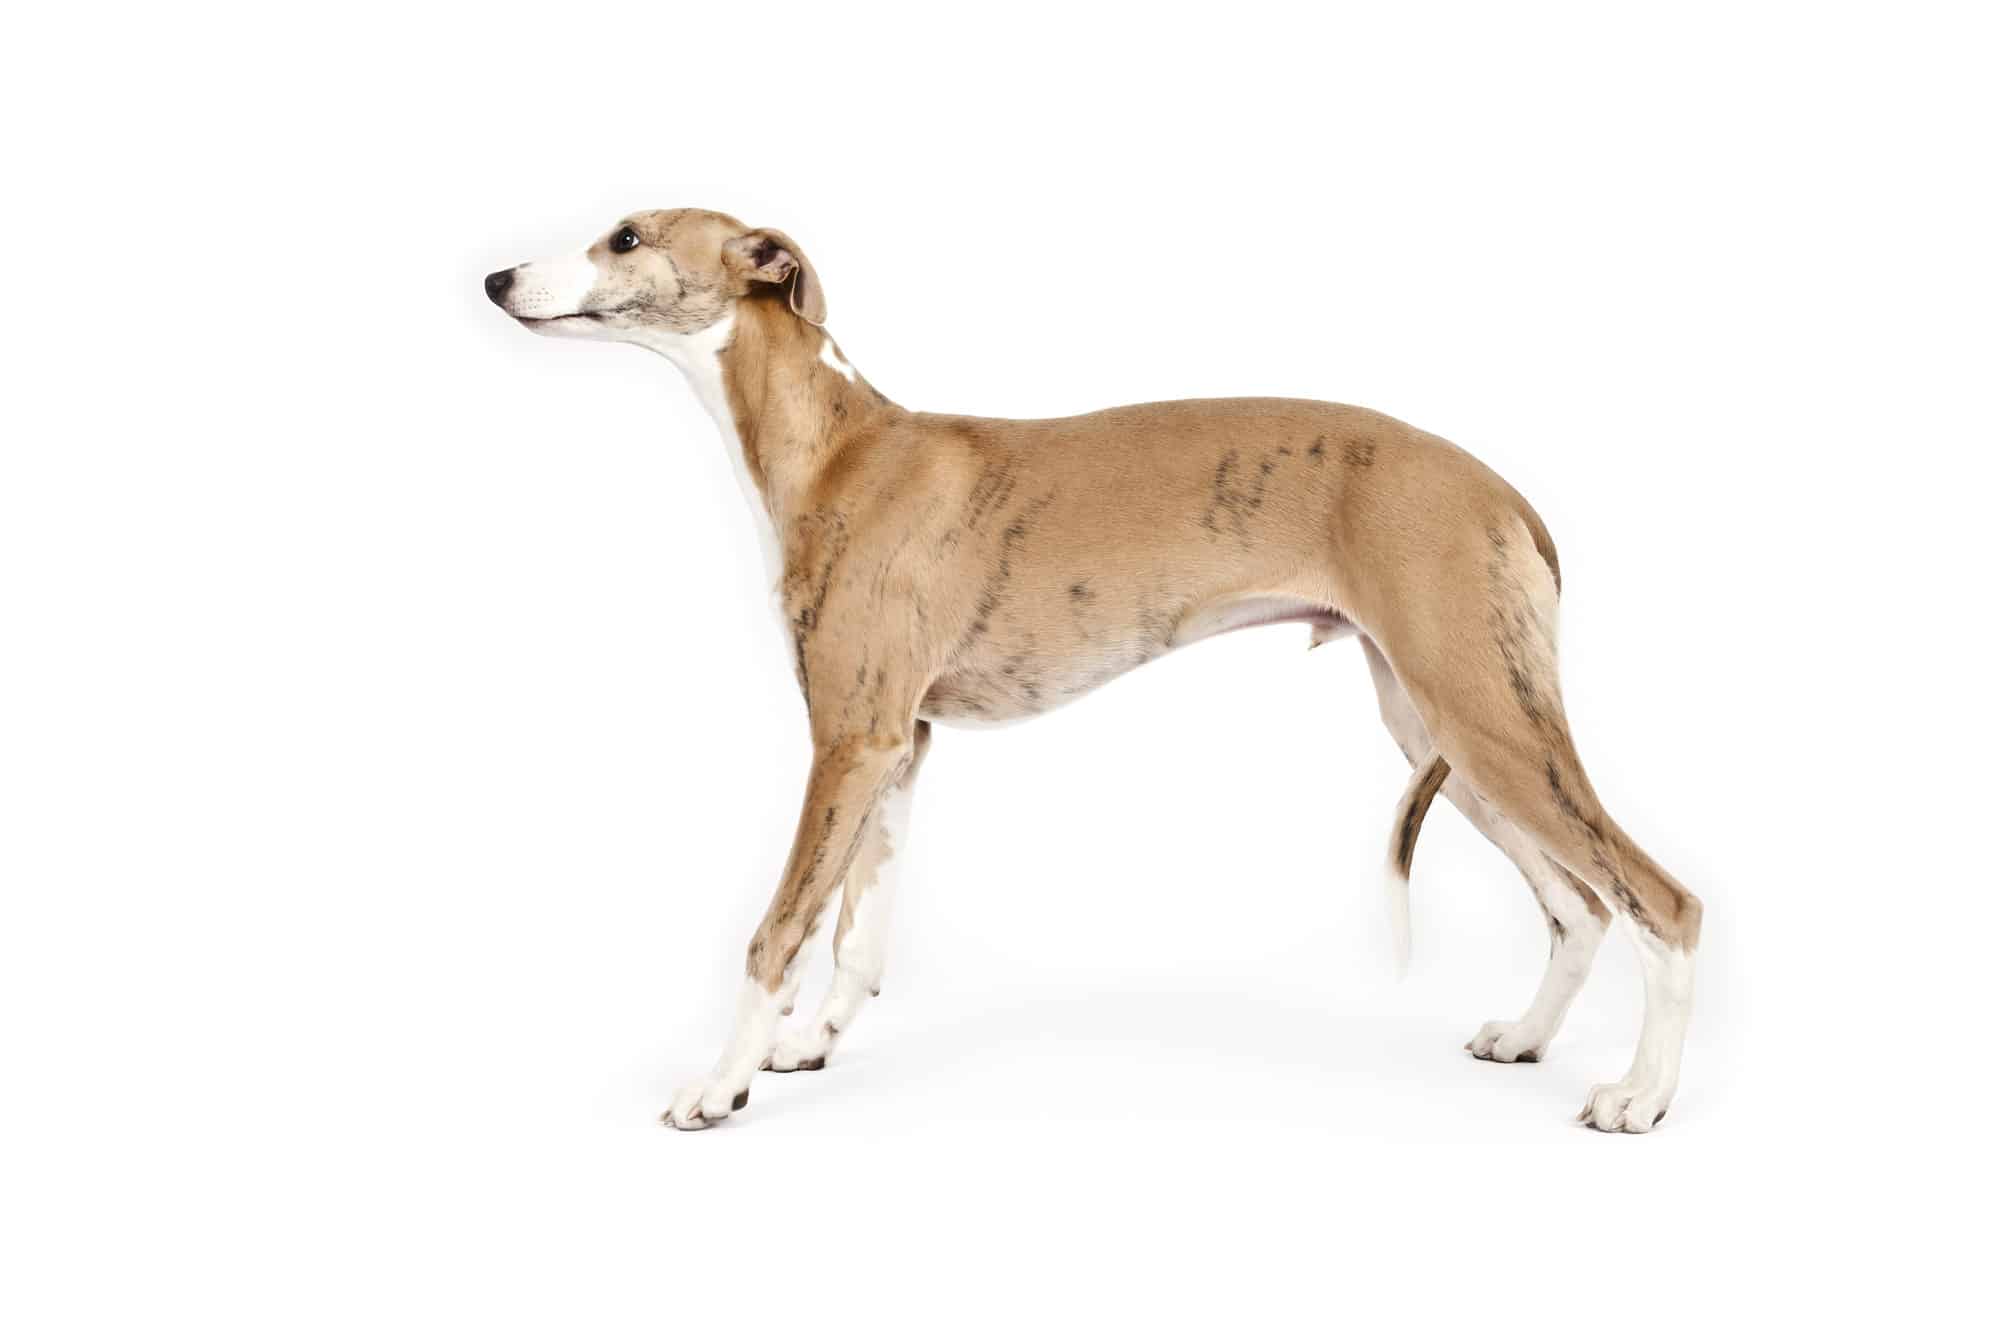 An image of a beautiful whippet dog on white background